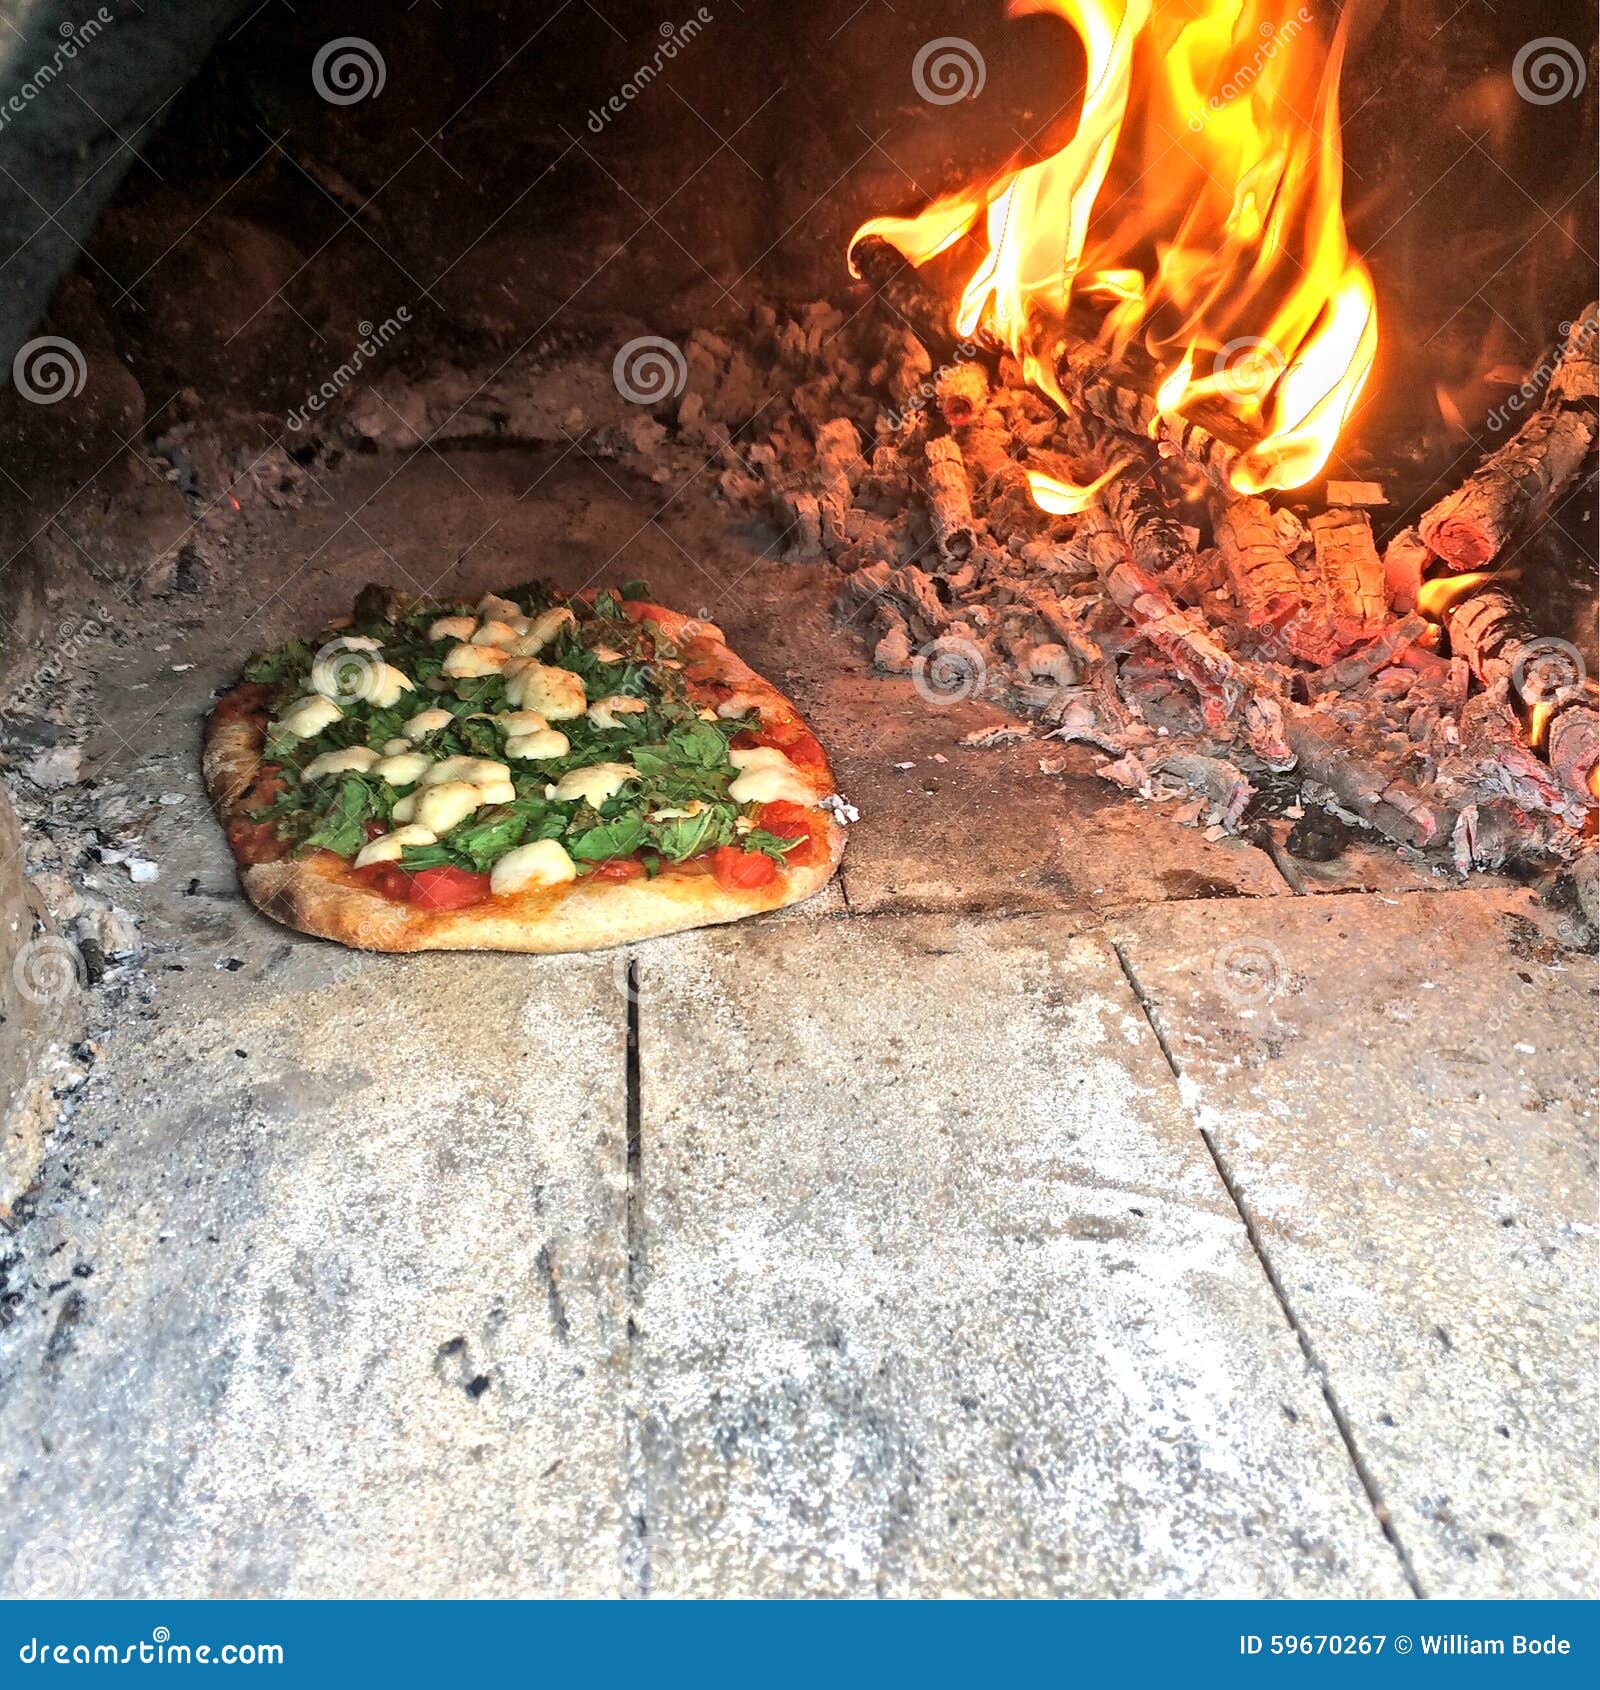 Artisan wood fired pizza baked in a clay cob earthen oven.